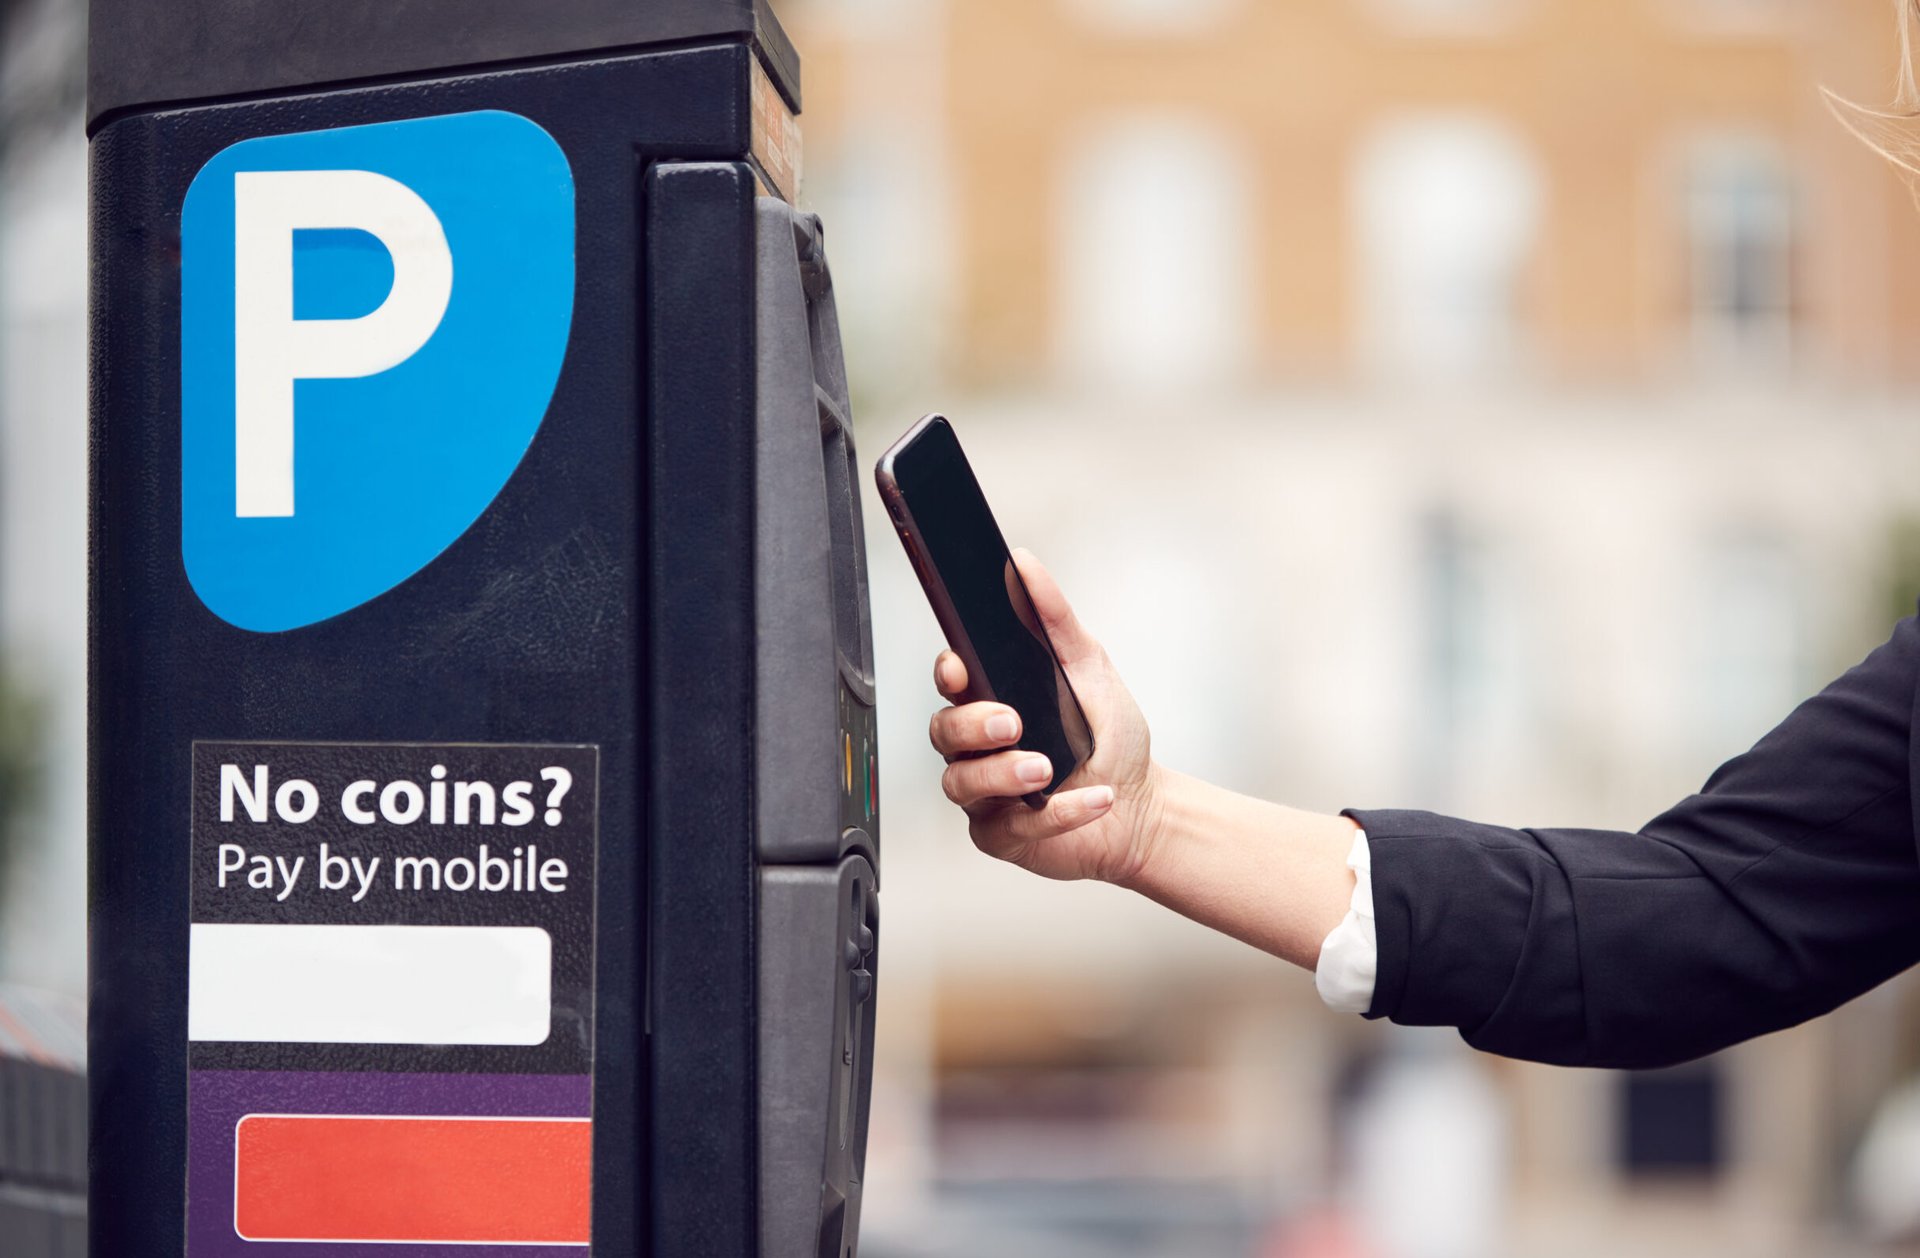 Person scanning a parking meter with a smartphone